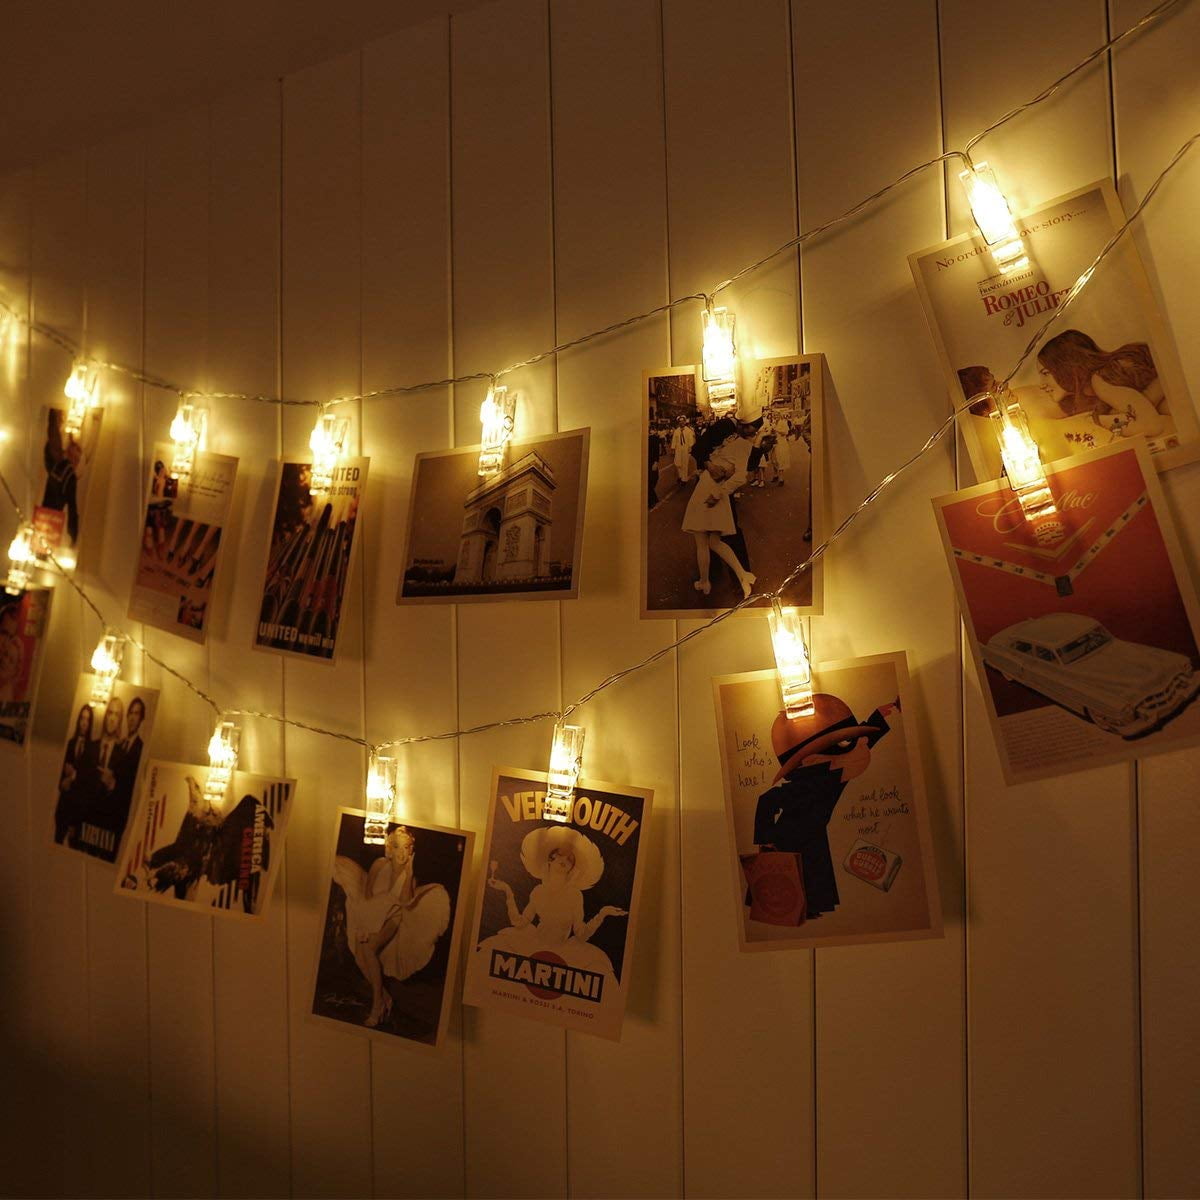 Vnsg 40 LED Photo Clip String Lights for Bedroom Wall DecorBattery or Plug Infairy Lights to Hang Pictures Christmas Cards, Wedding Photos20ft Soft